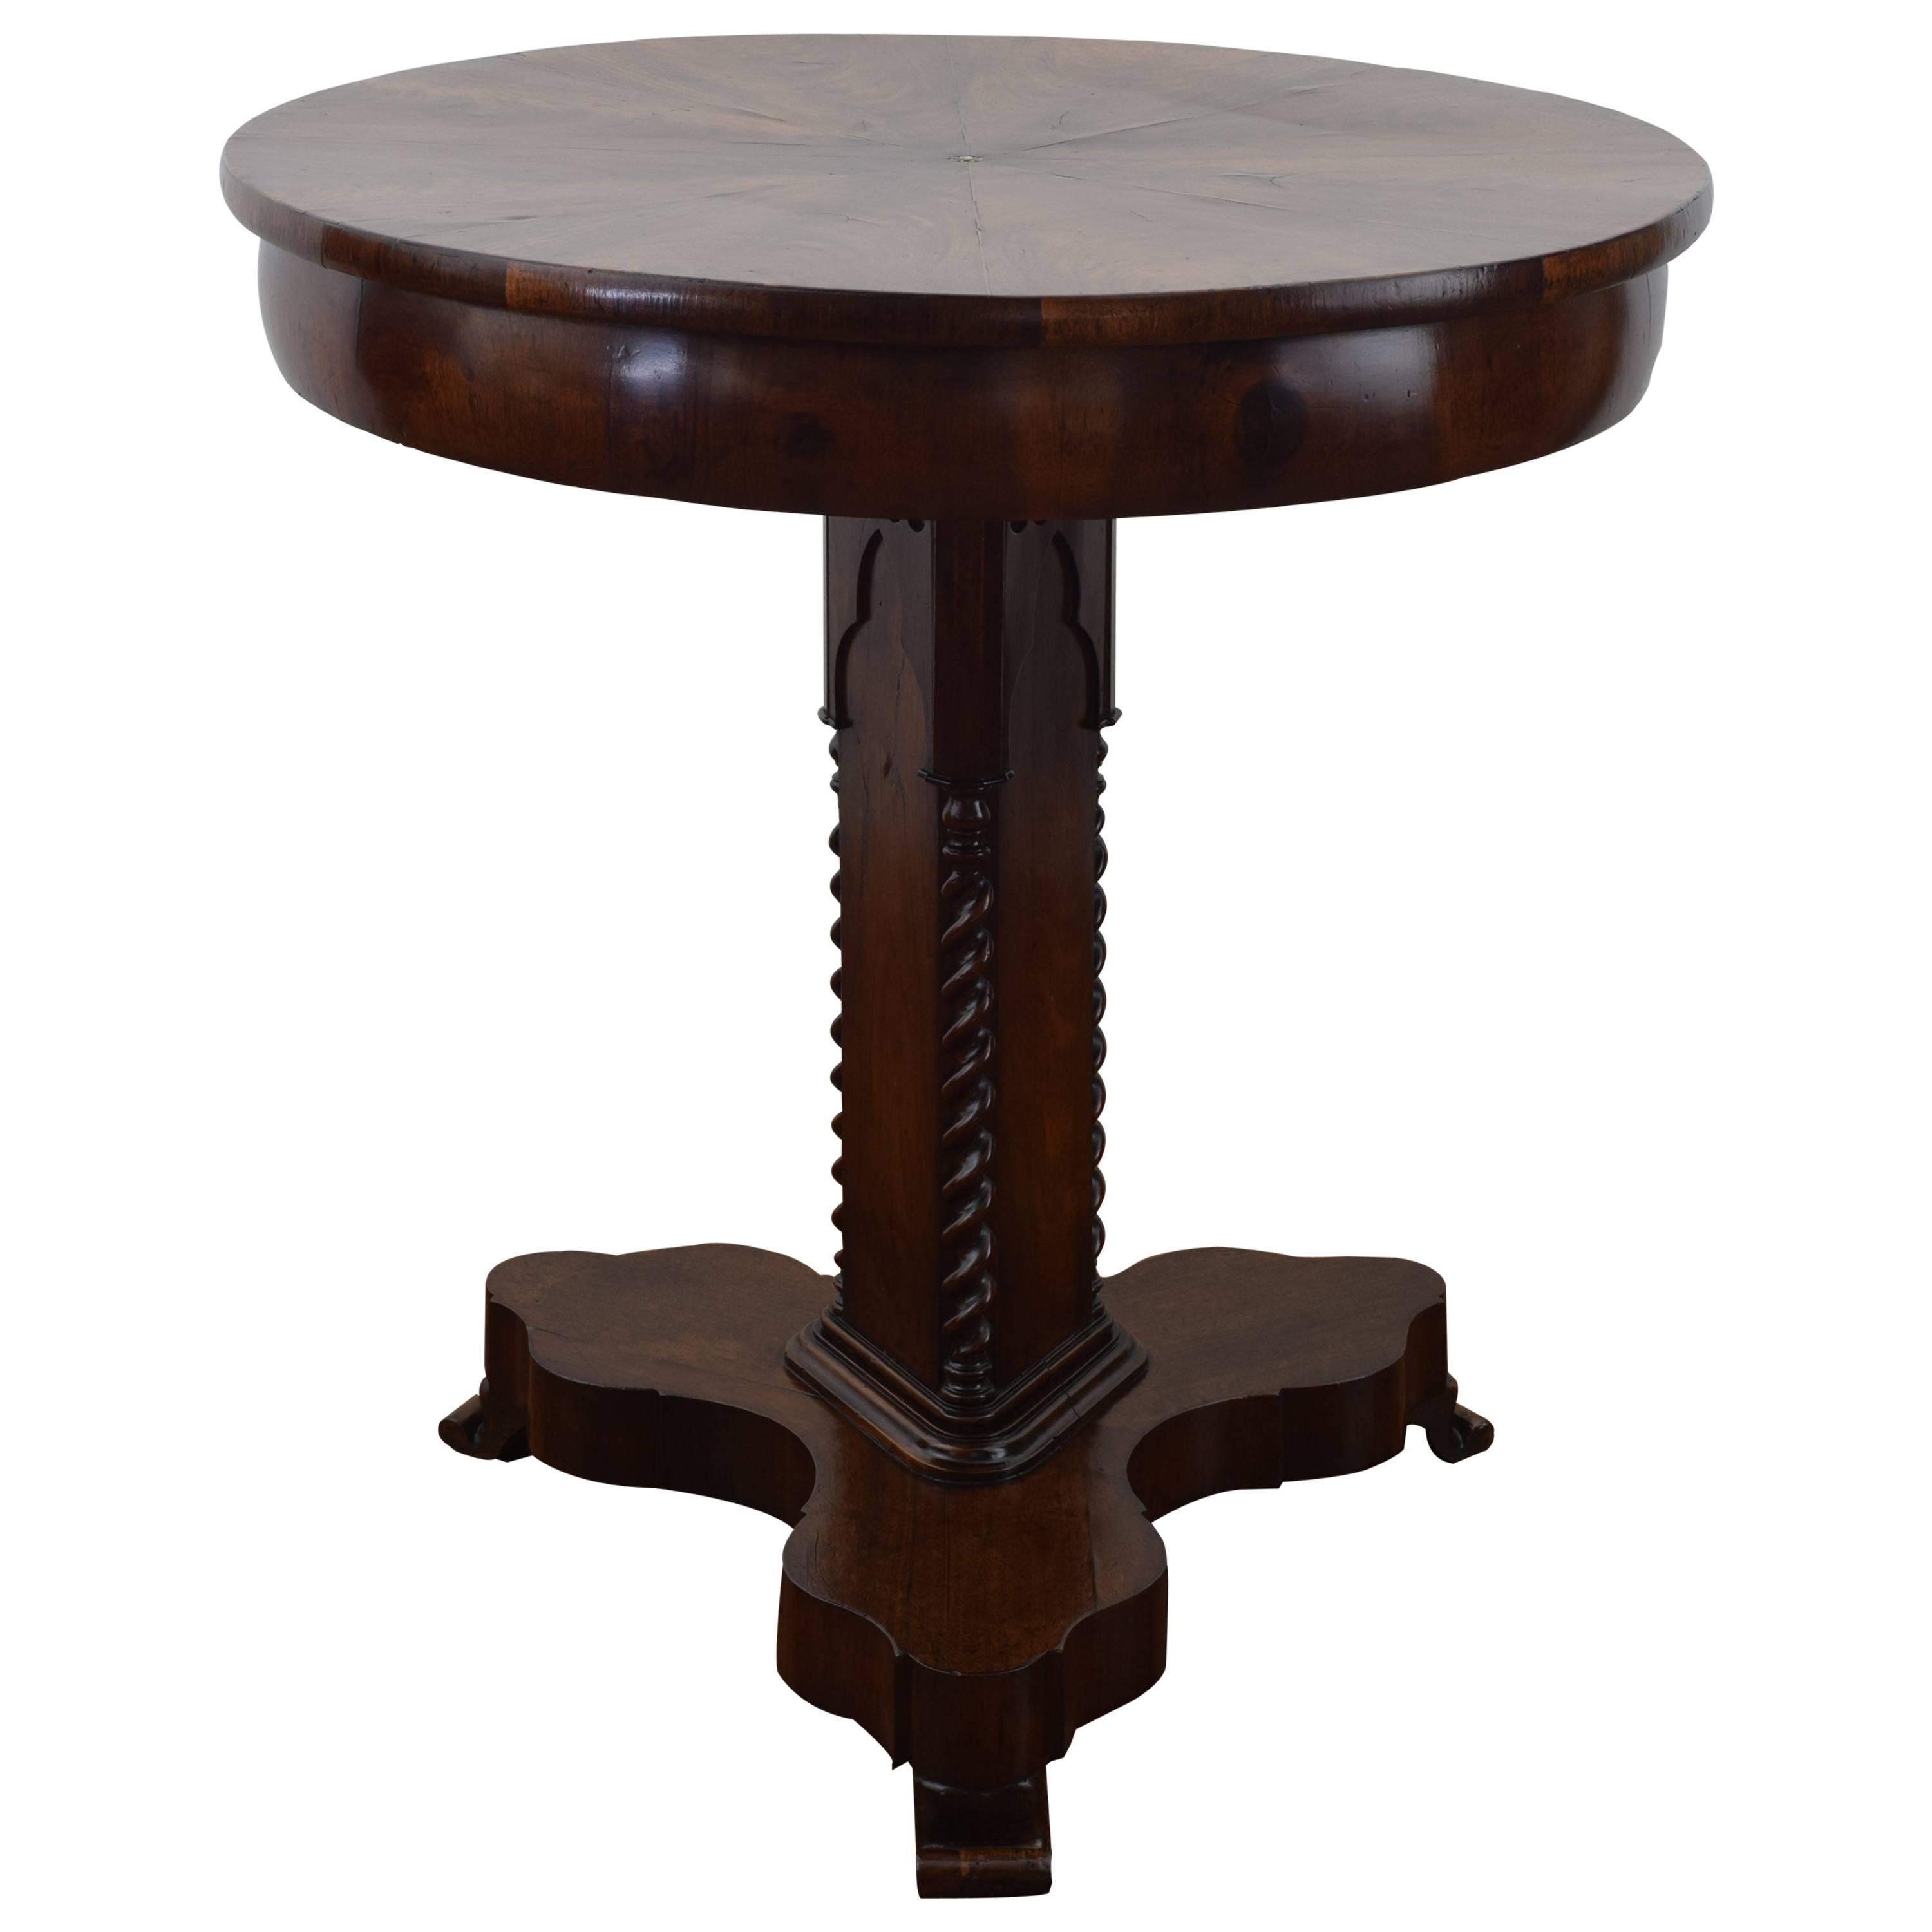 Italian Gothic Revival Carved Mahogany and Inlaid Center Table, Mid-19th Century